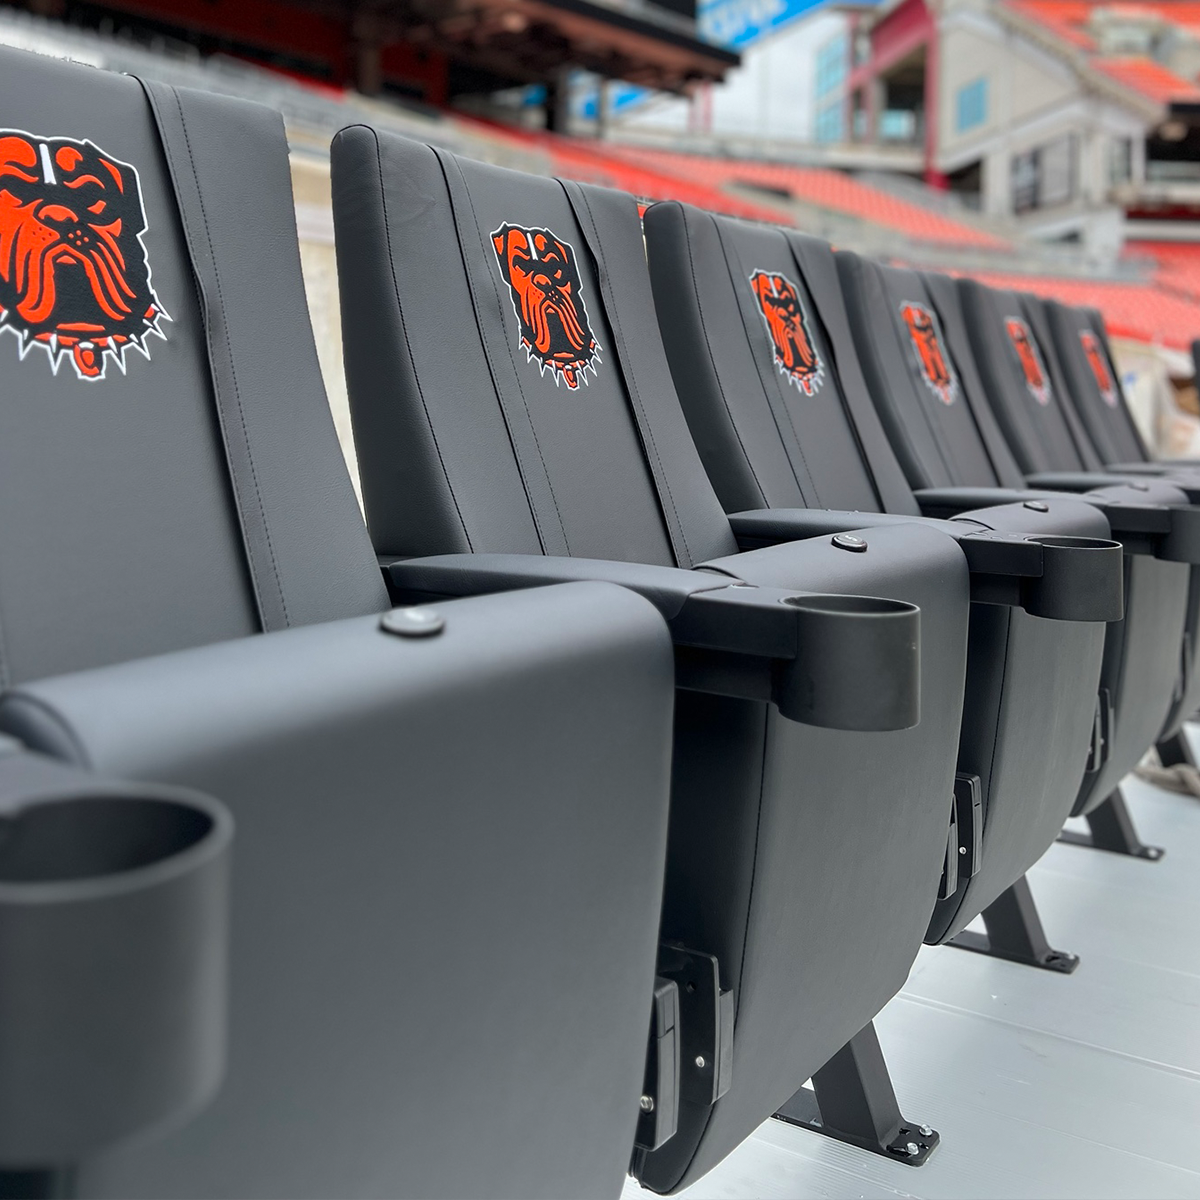 SuiteMax 3.5 VIP Seats with San Francisco Giants Cooperstown Logo